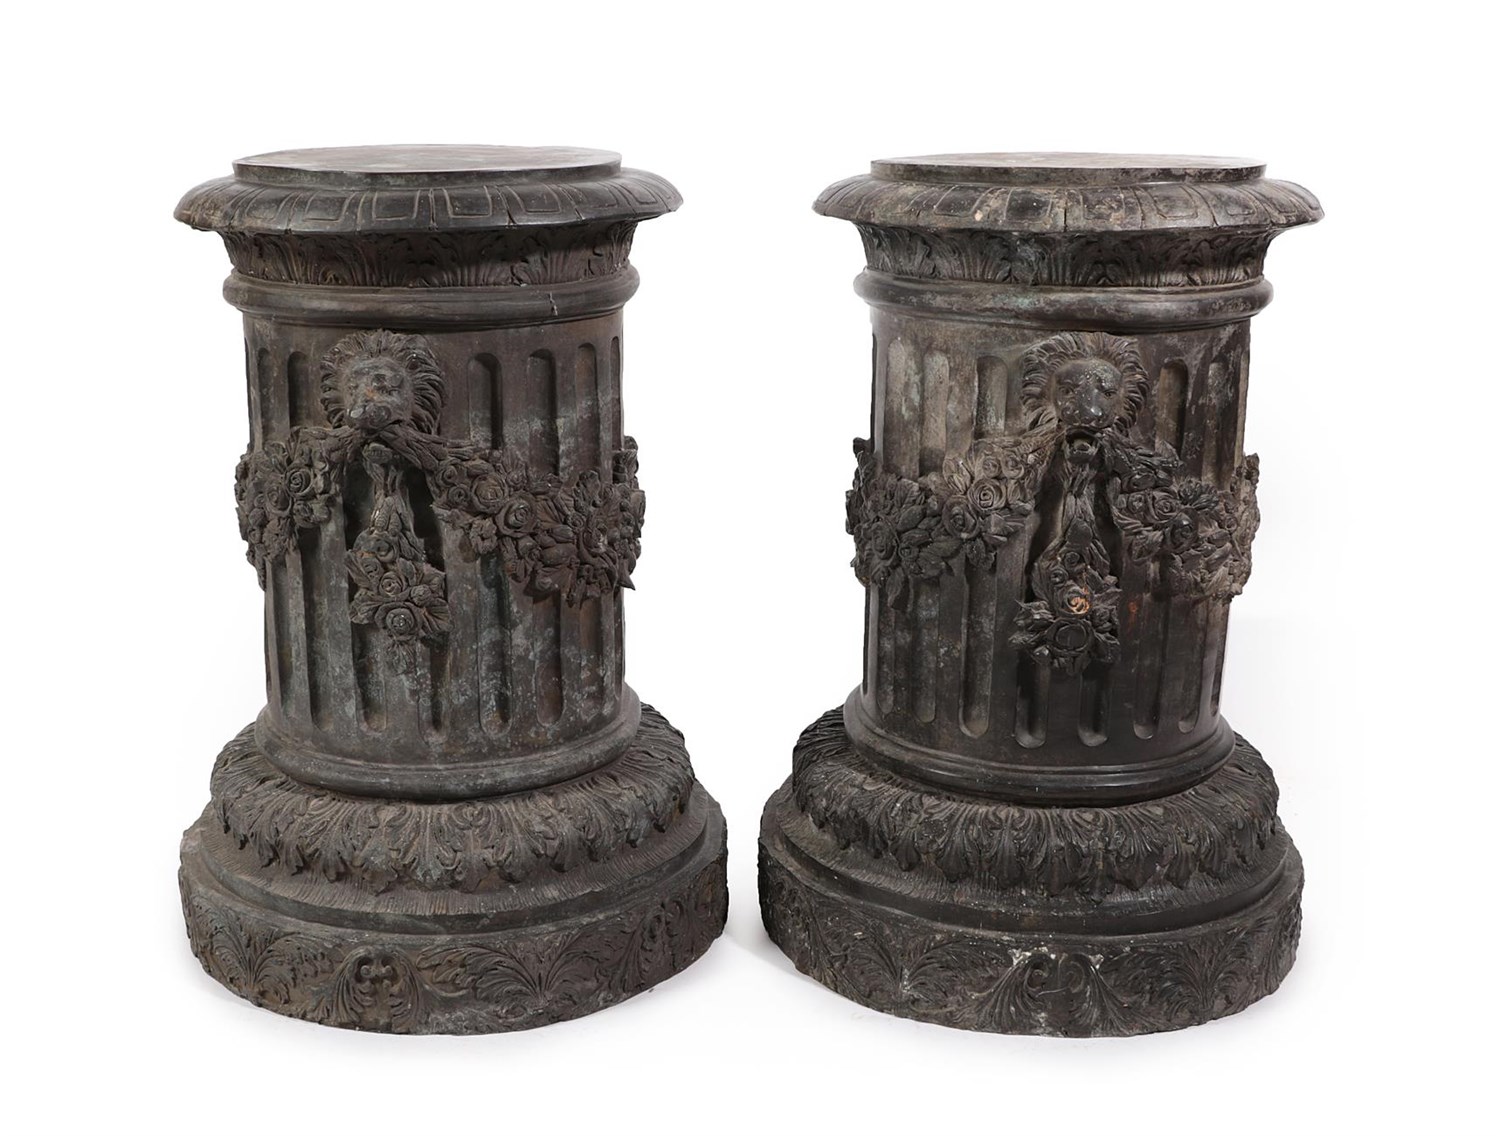 Lot 215 - A Pair of Bronzed Columns, late 19th/early 20th century, of fluted cylindrical form, decorated with